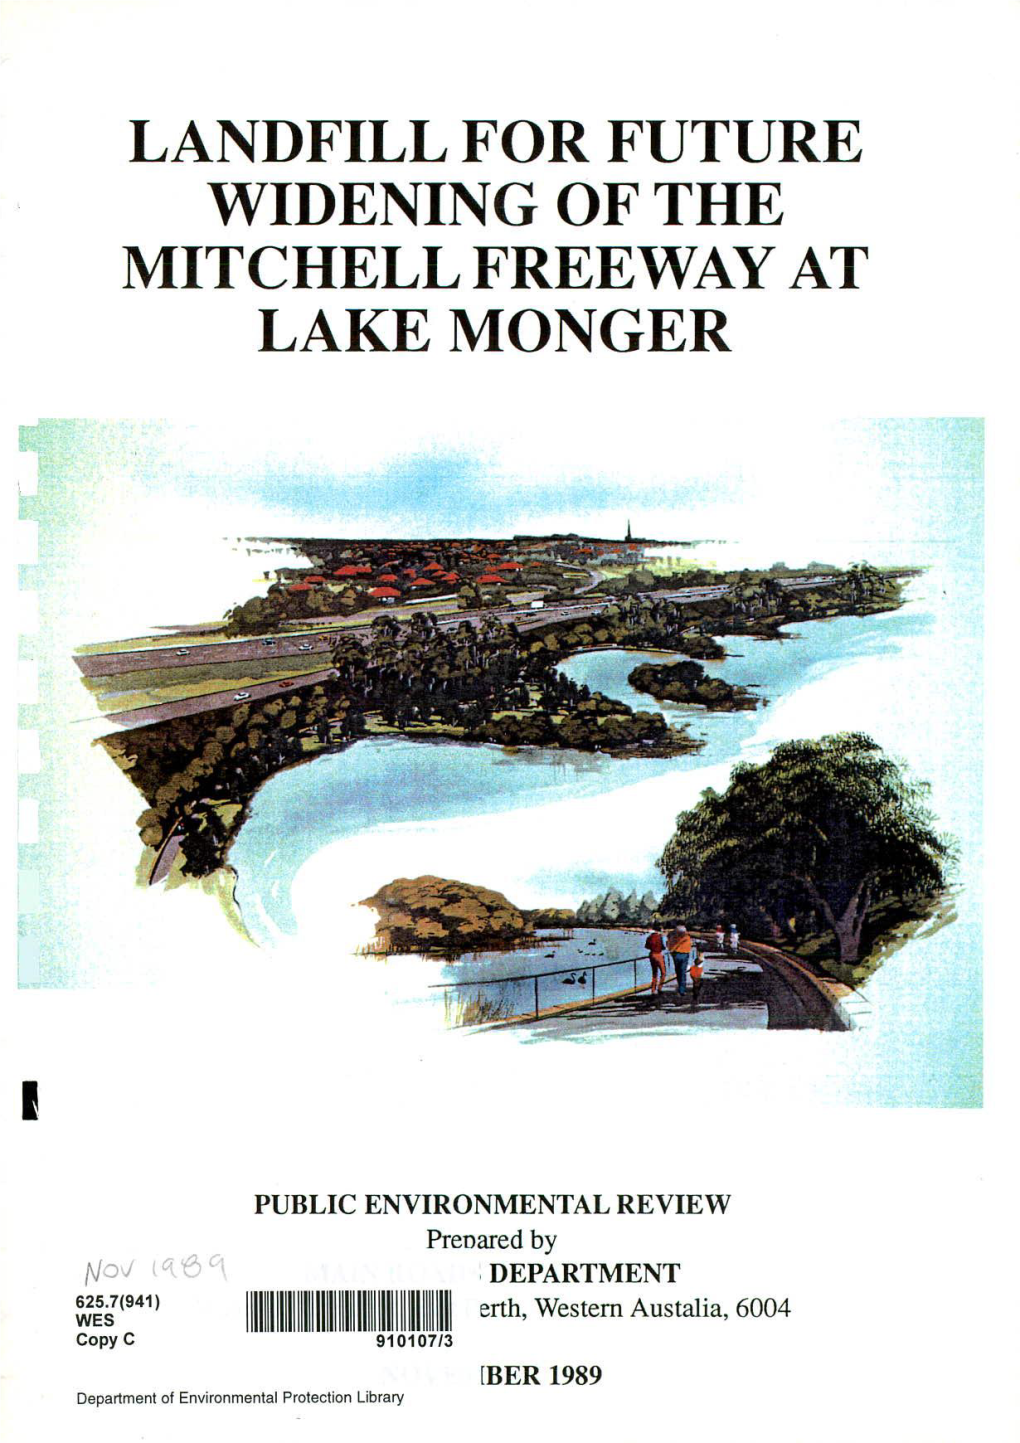 Landfill for Future Widening of the Mitchell Freeway at Lake Monger